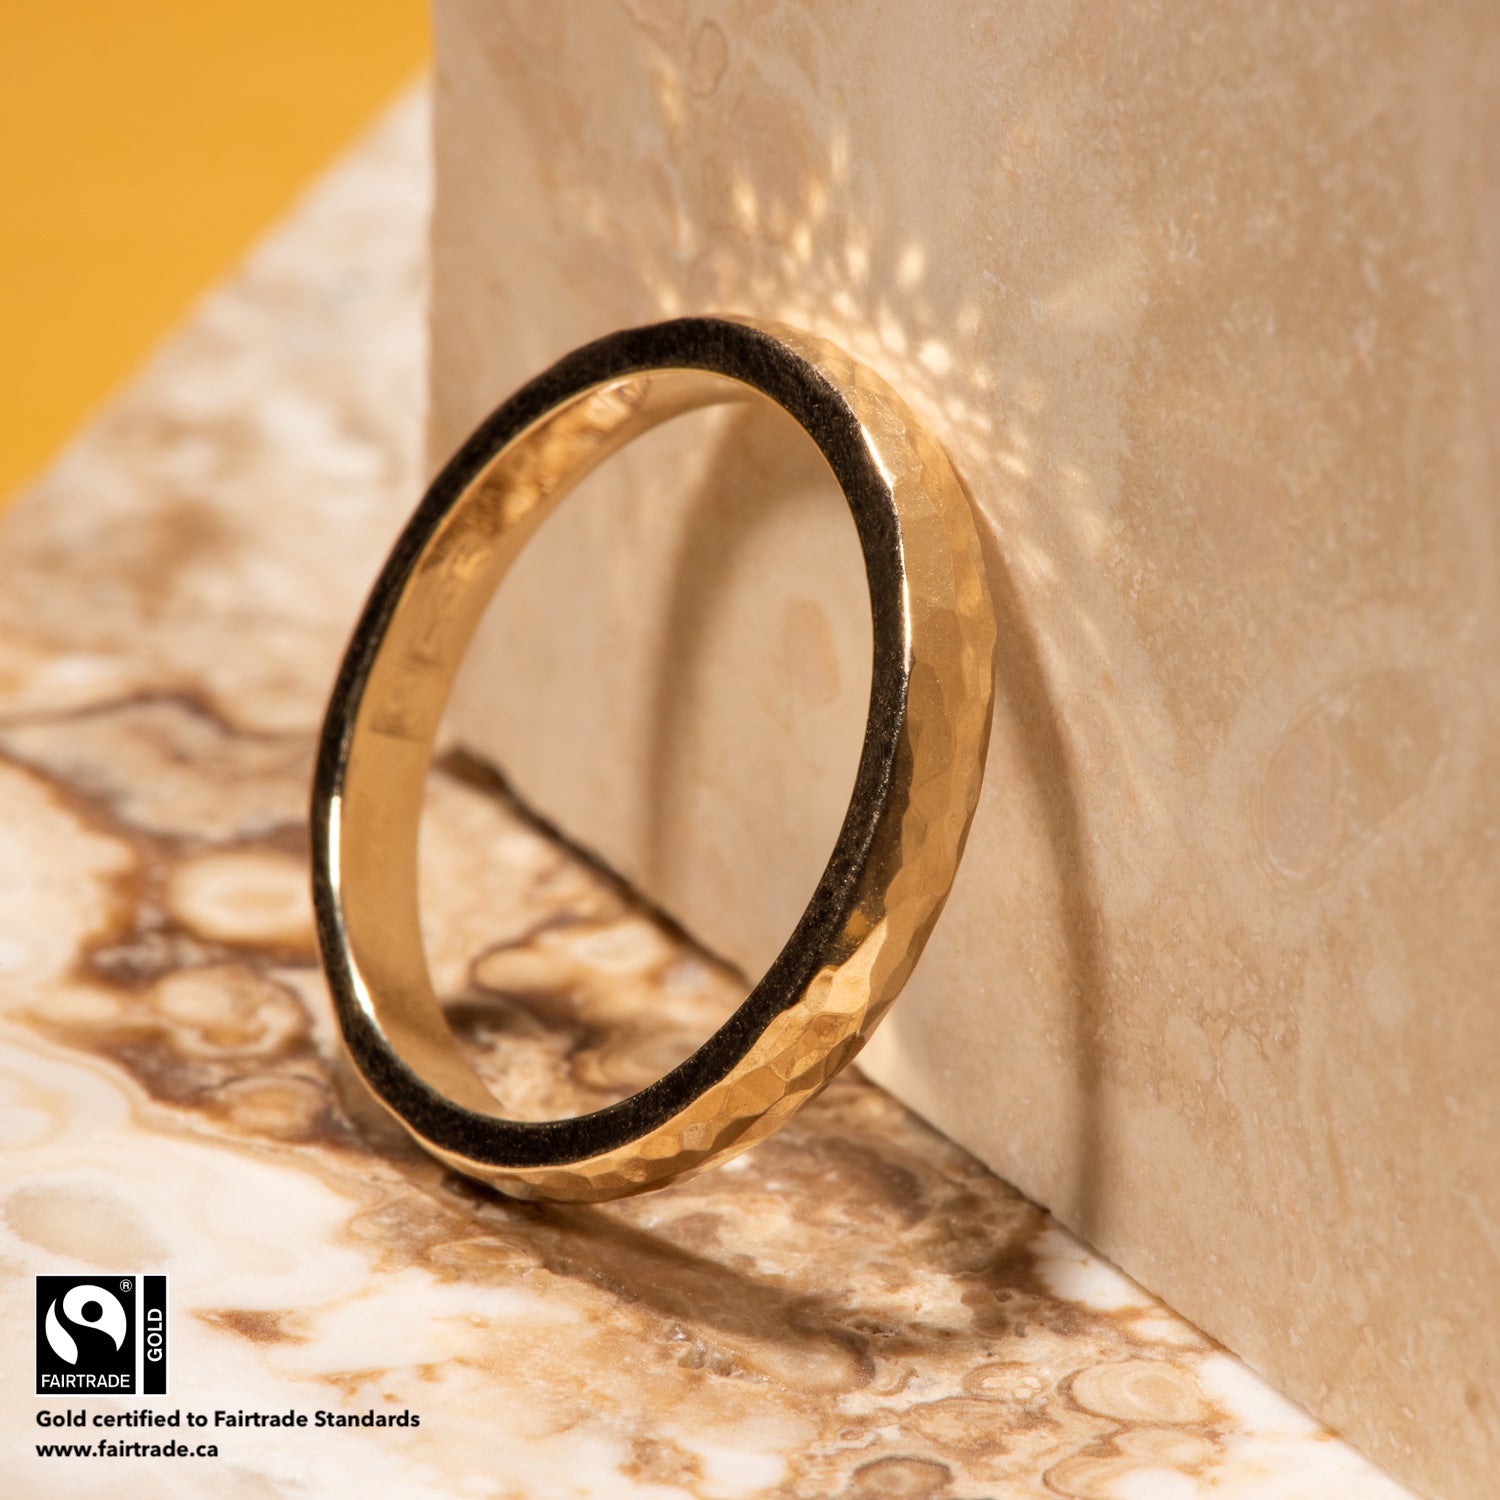 14 karat Fairtrade Certified yellow gold ring with a ball peen hammer finish brought to a high polish. The ring is engraved with the Fairtrade logo and hallmarked 585.